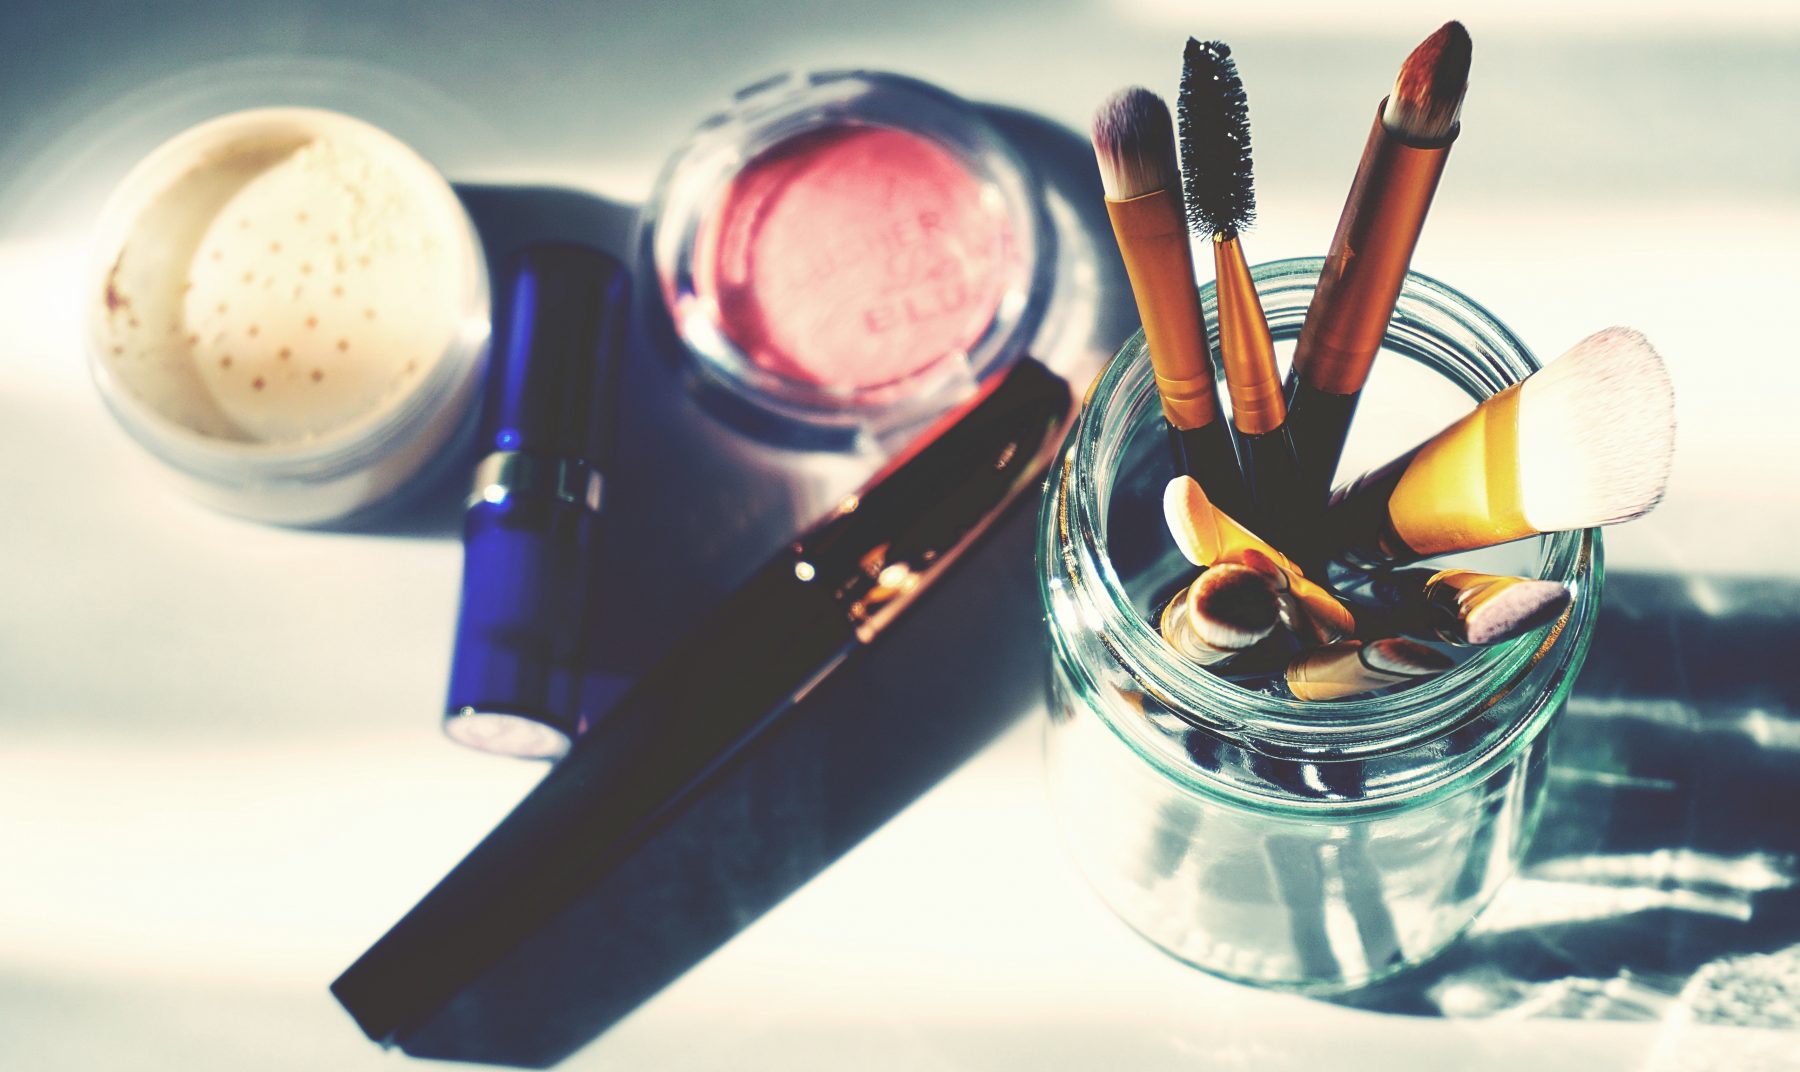 Cosmetics Conferences Come to the City